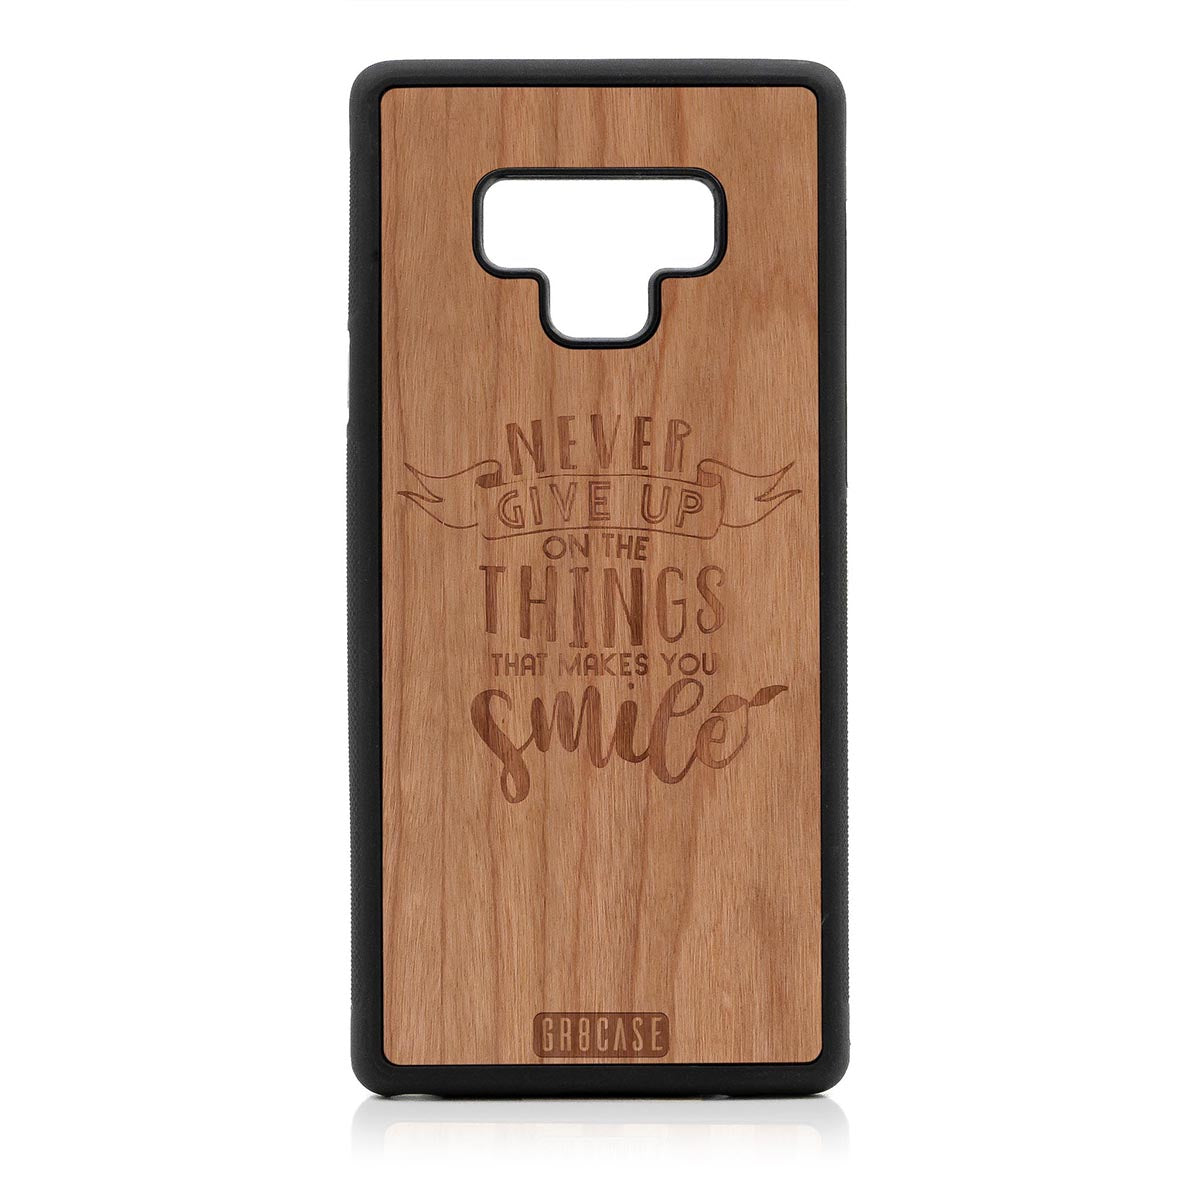 Never Give Up On The Things That Makes You Smile Design Wood Case Samsung Galaxy Note 9 by GR8CASE